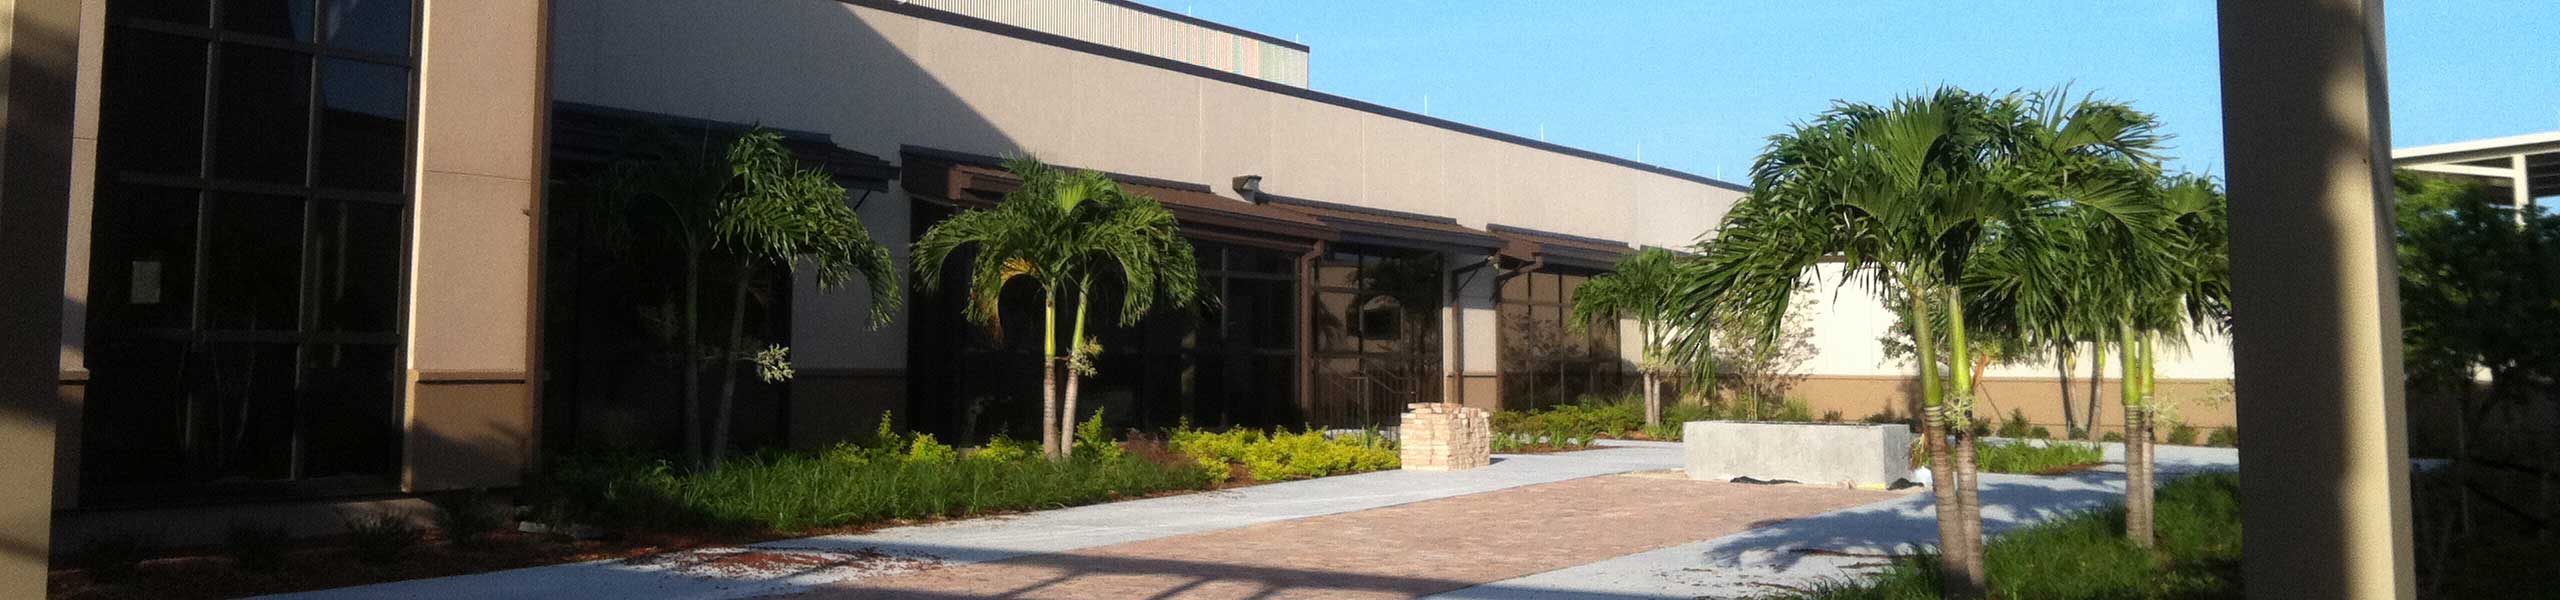 Hendry Regional Medical Center - Clewiston Information